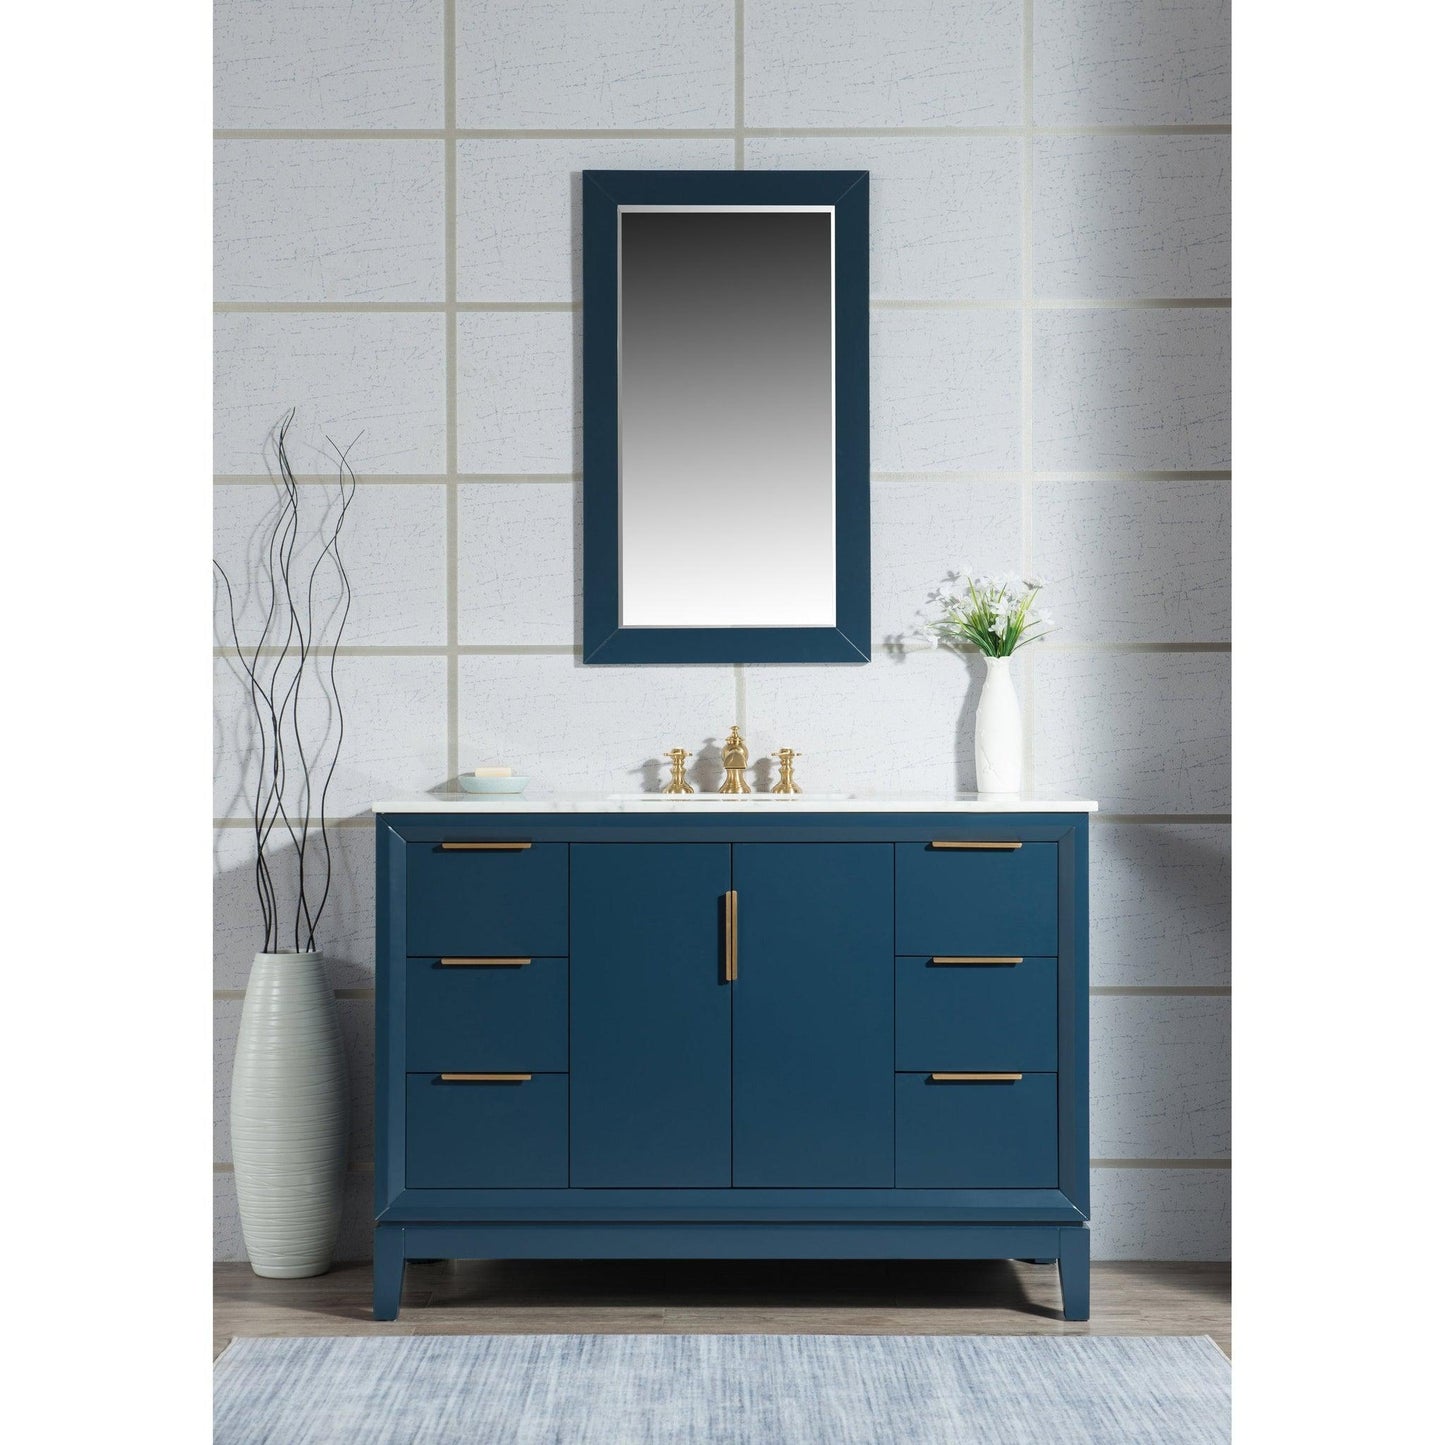 Water Creation Elizabeth 48" Single Sink Carrara White Marble Vanity In Monarch Blue With Matching Mirror and F2-0013-06-FX Lavatory Faucet